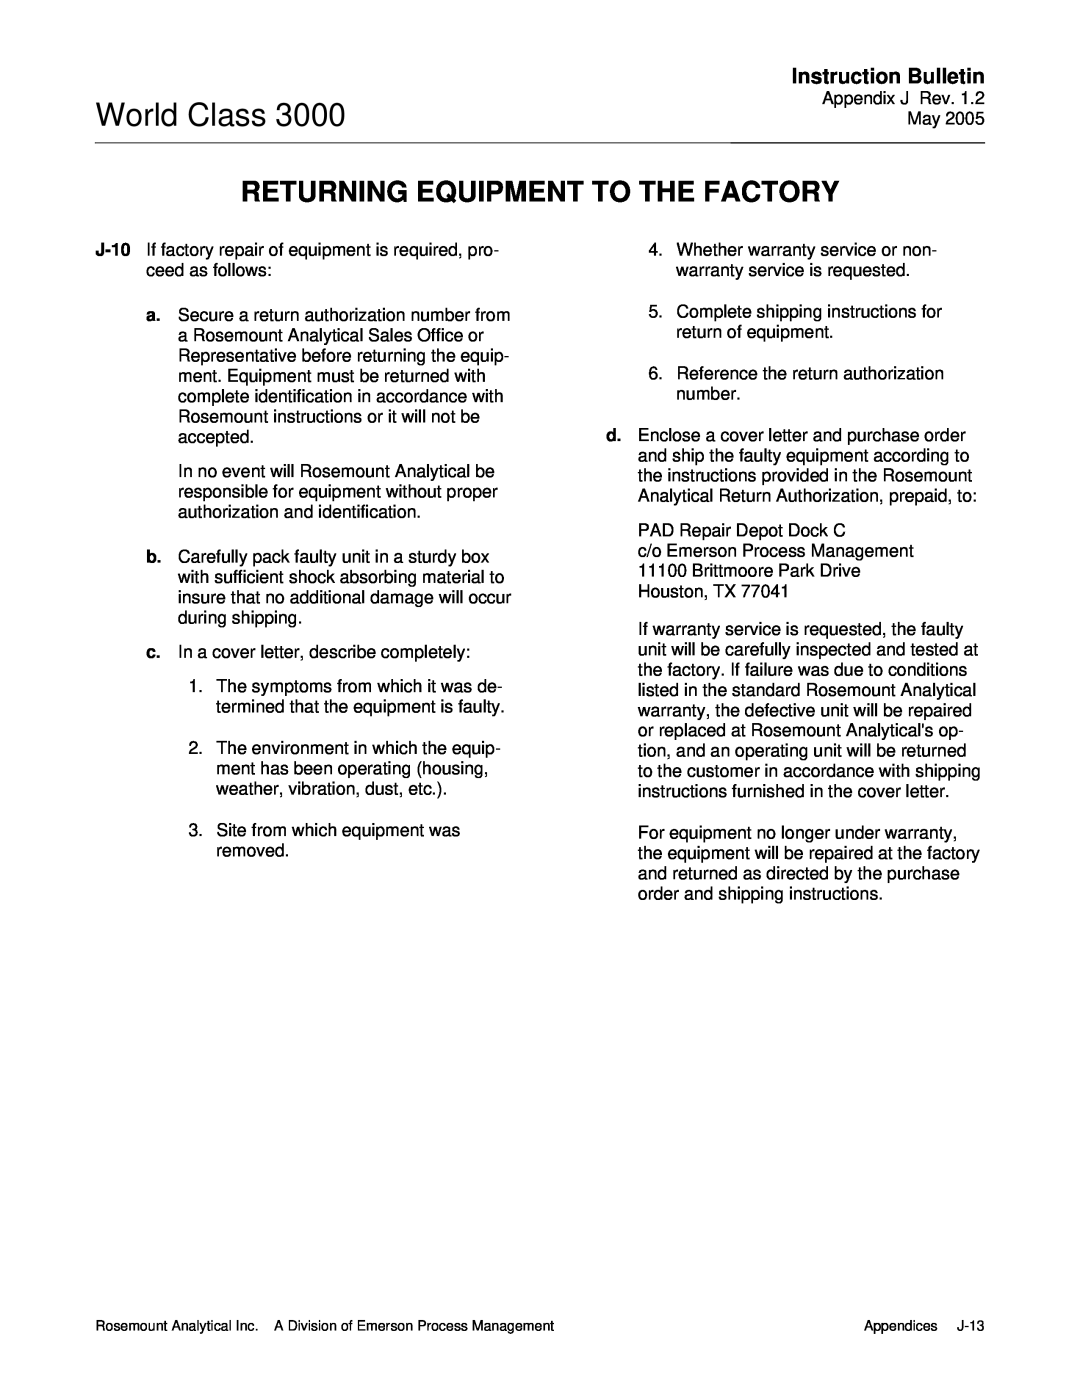 Emerson 3000 instruction manual Returning Equipment To The Factory, World Class, Instruction Bulletin 